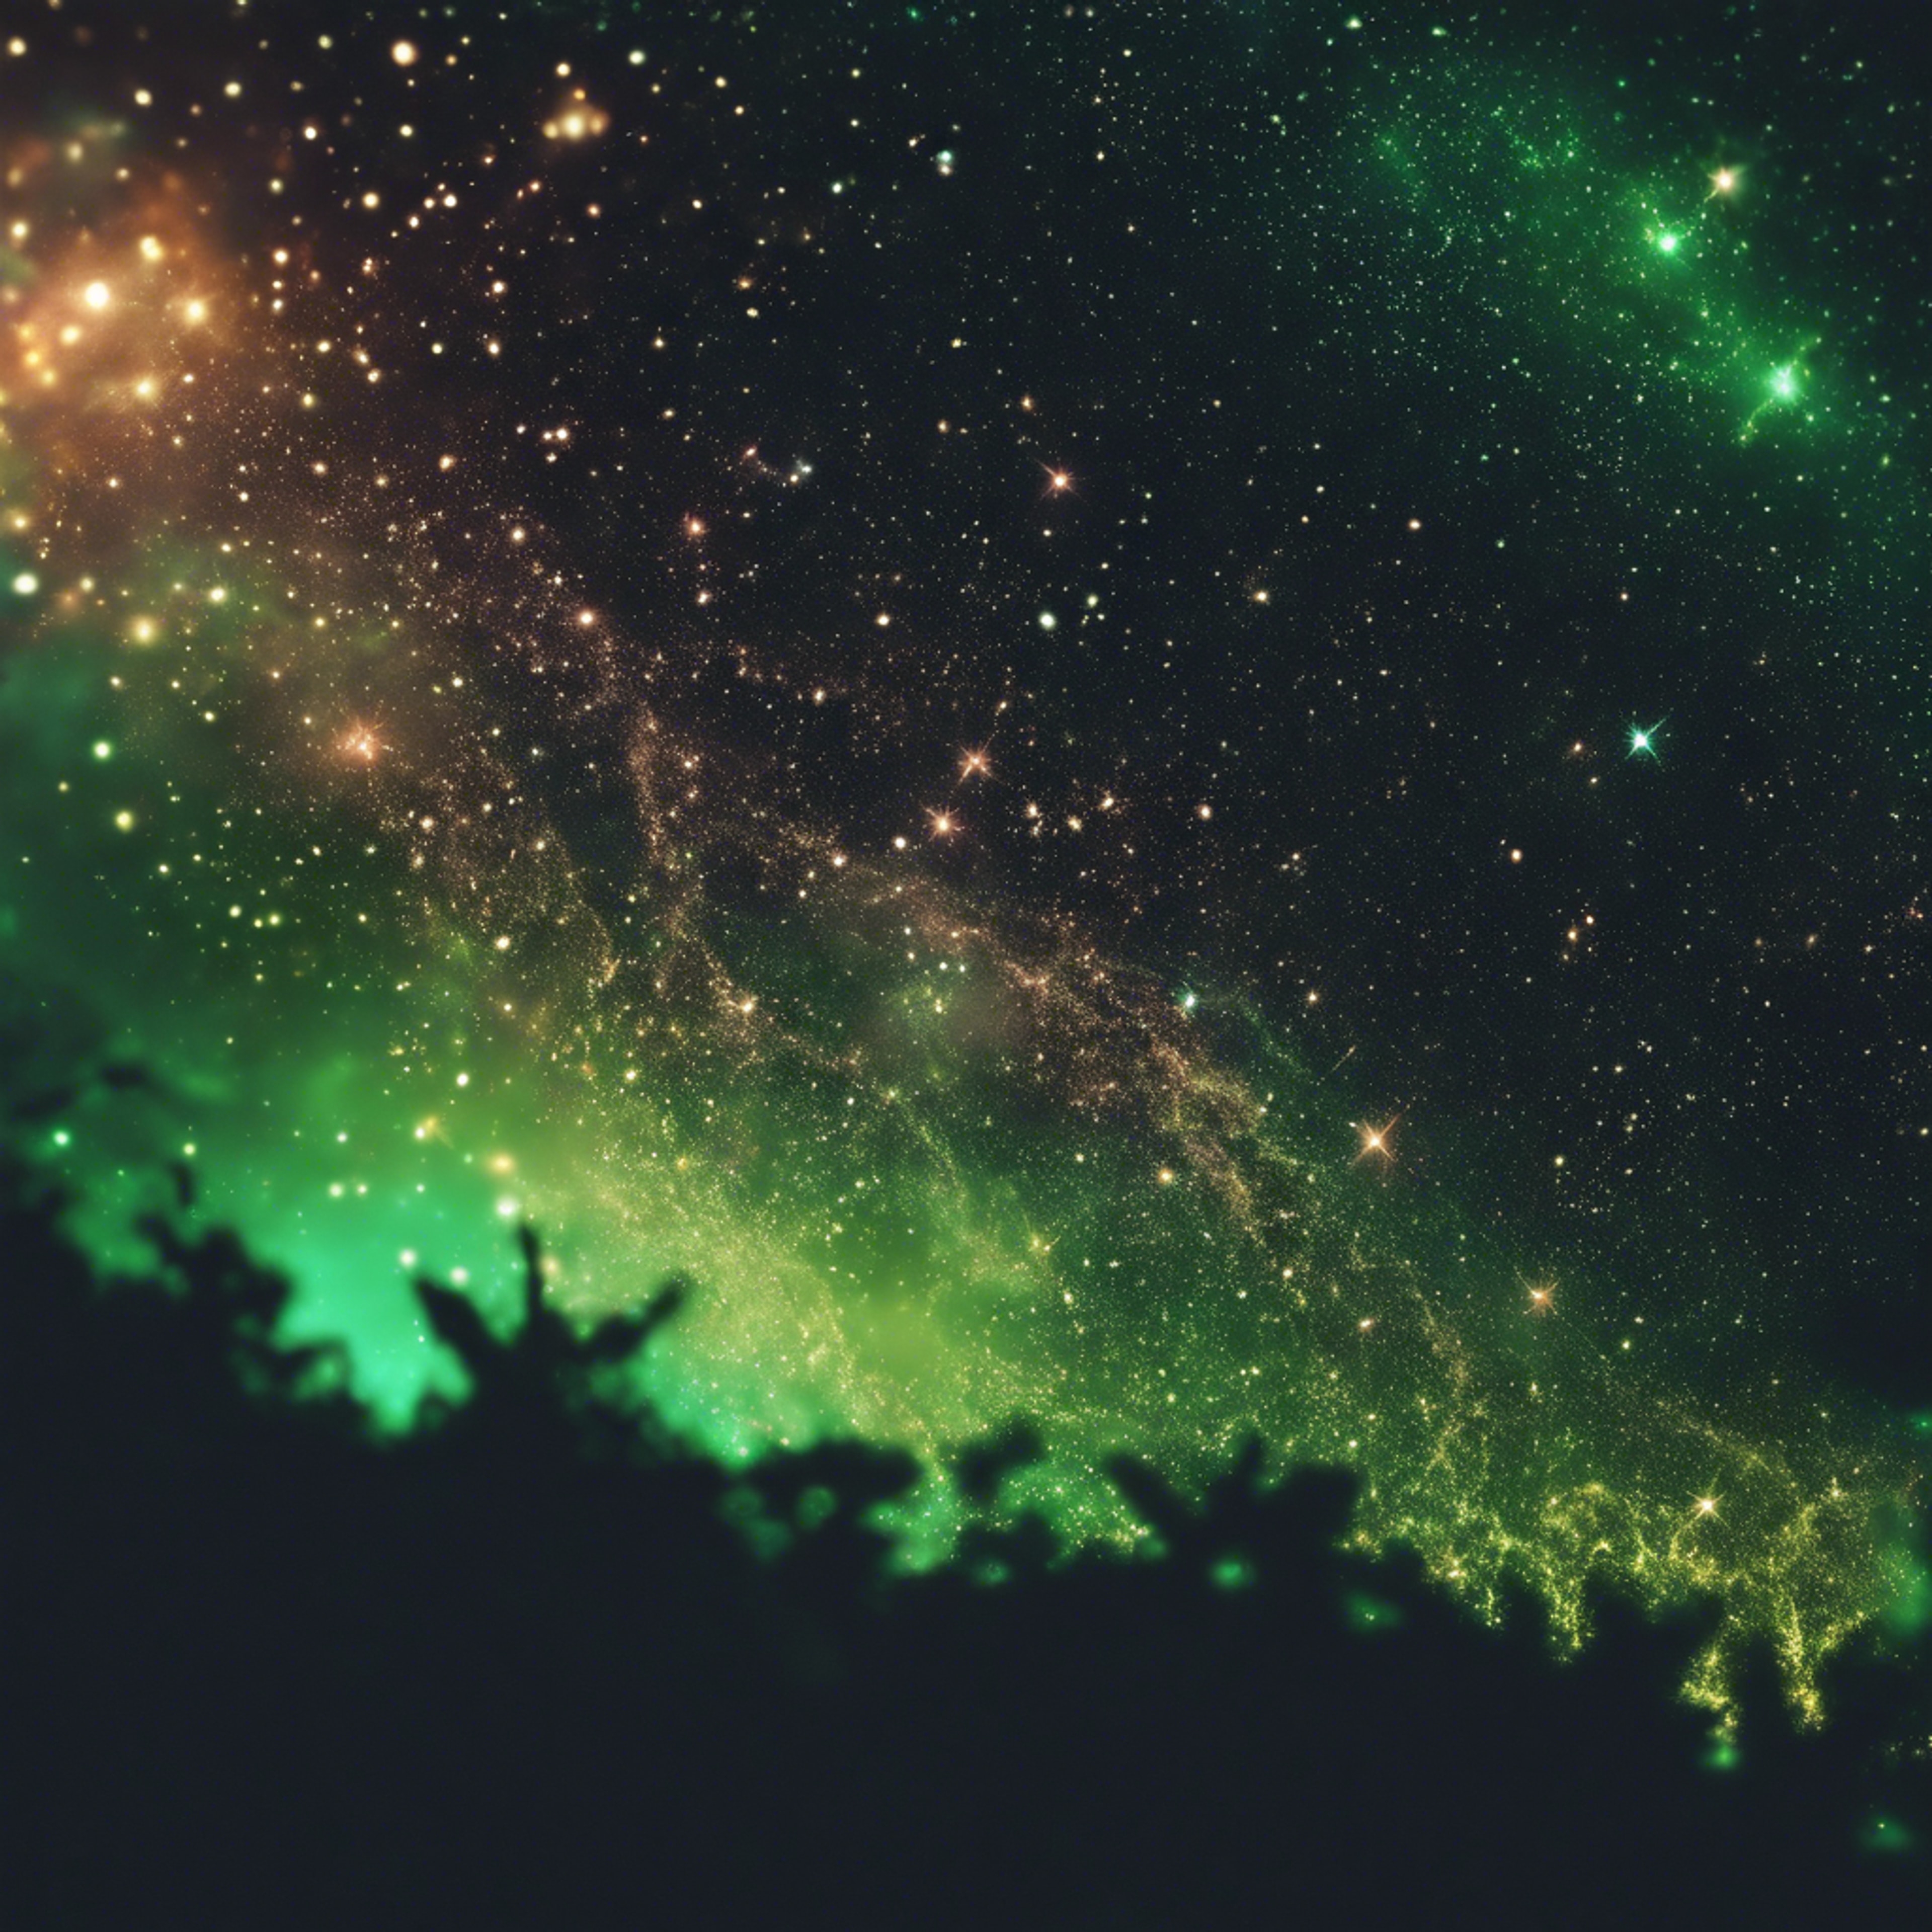 A galaxy seen from the edge of the universe, with cool neon green stars sparking in the darkness. วอลล์เปเปอร์[23da465cd95e430a971e]